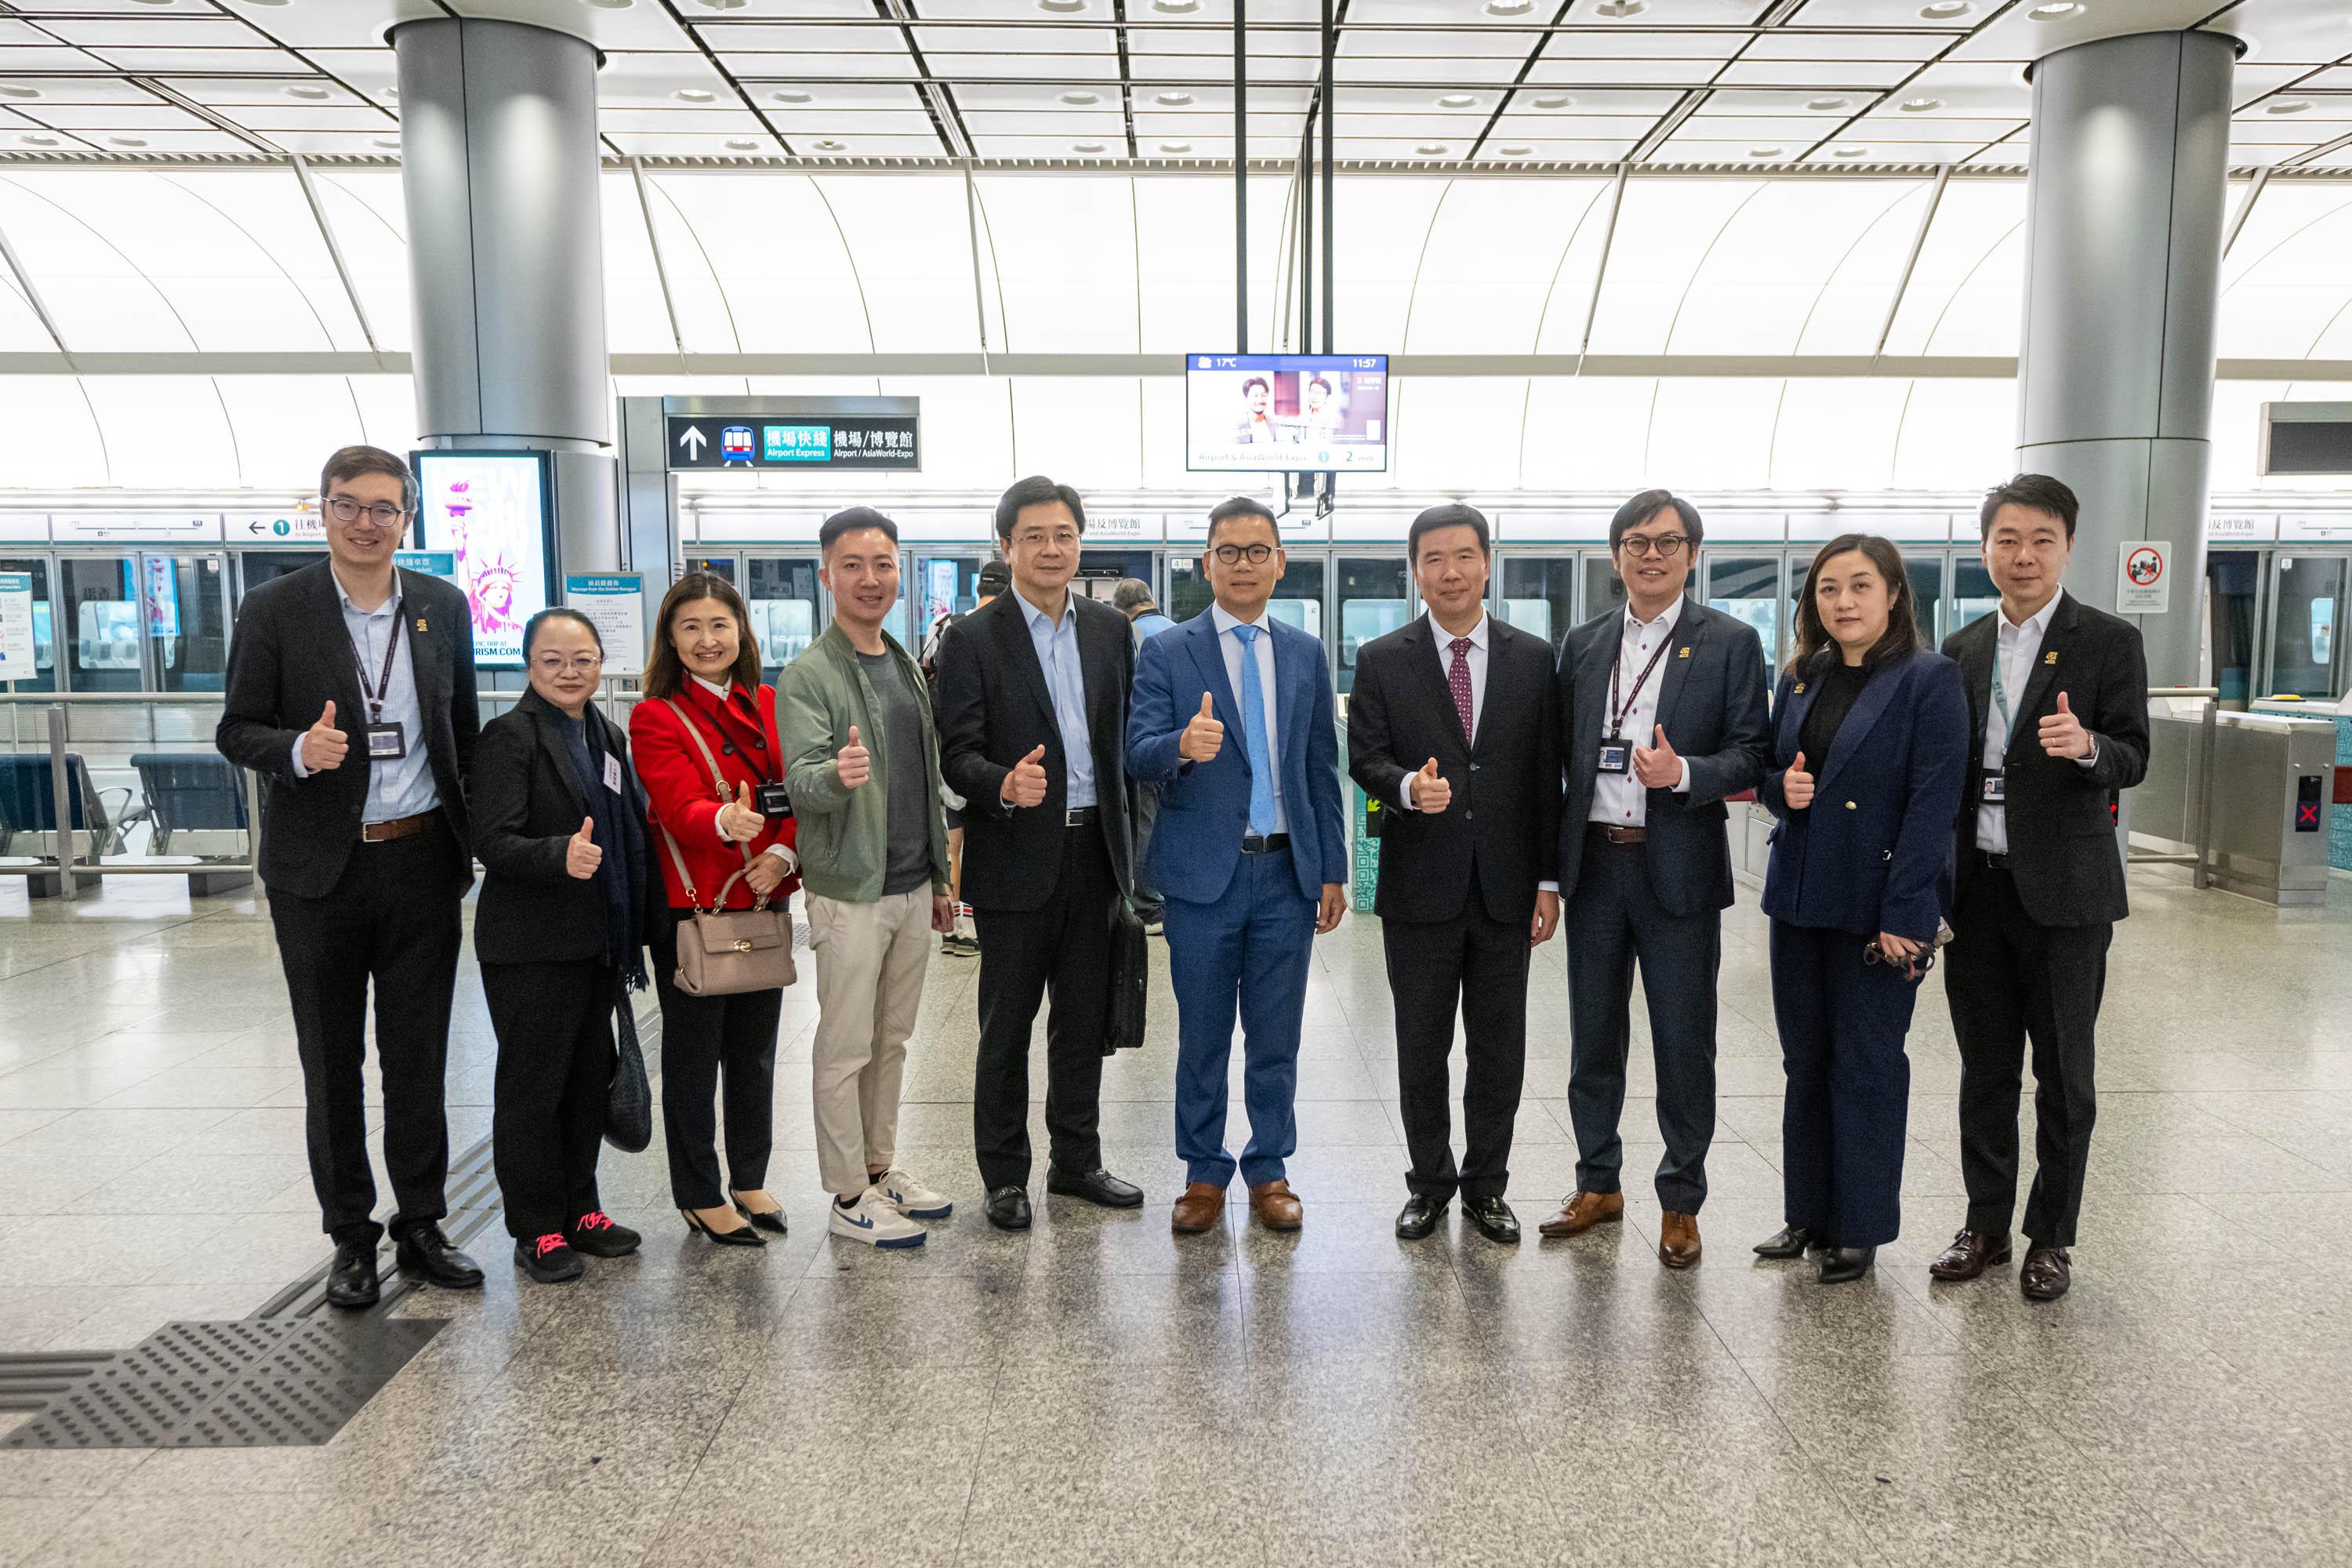 The Legislative Council (LegCo) Panel on Transport visited the in-town check-in service at the Airport Express Hong Kong Station today (February 27). Photo shows the Chairman of the Panel on Transport, Mr Chan Han-pan (sixth left), the Deputy Chairman, Mr Dominic Lee (fourth left), other LegCo members and representatives of the MTR Corporation Limited at the Airport Express Hong Kong Station.